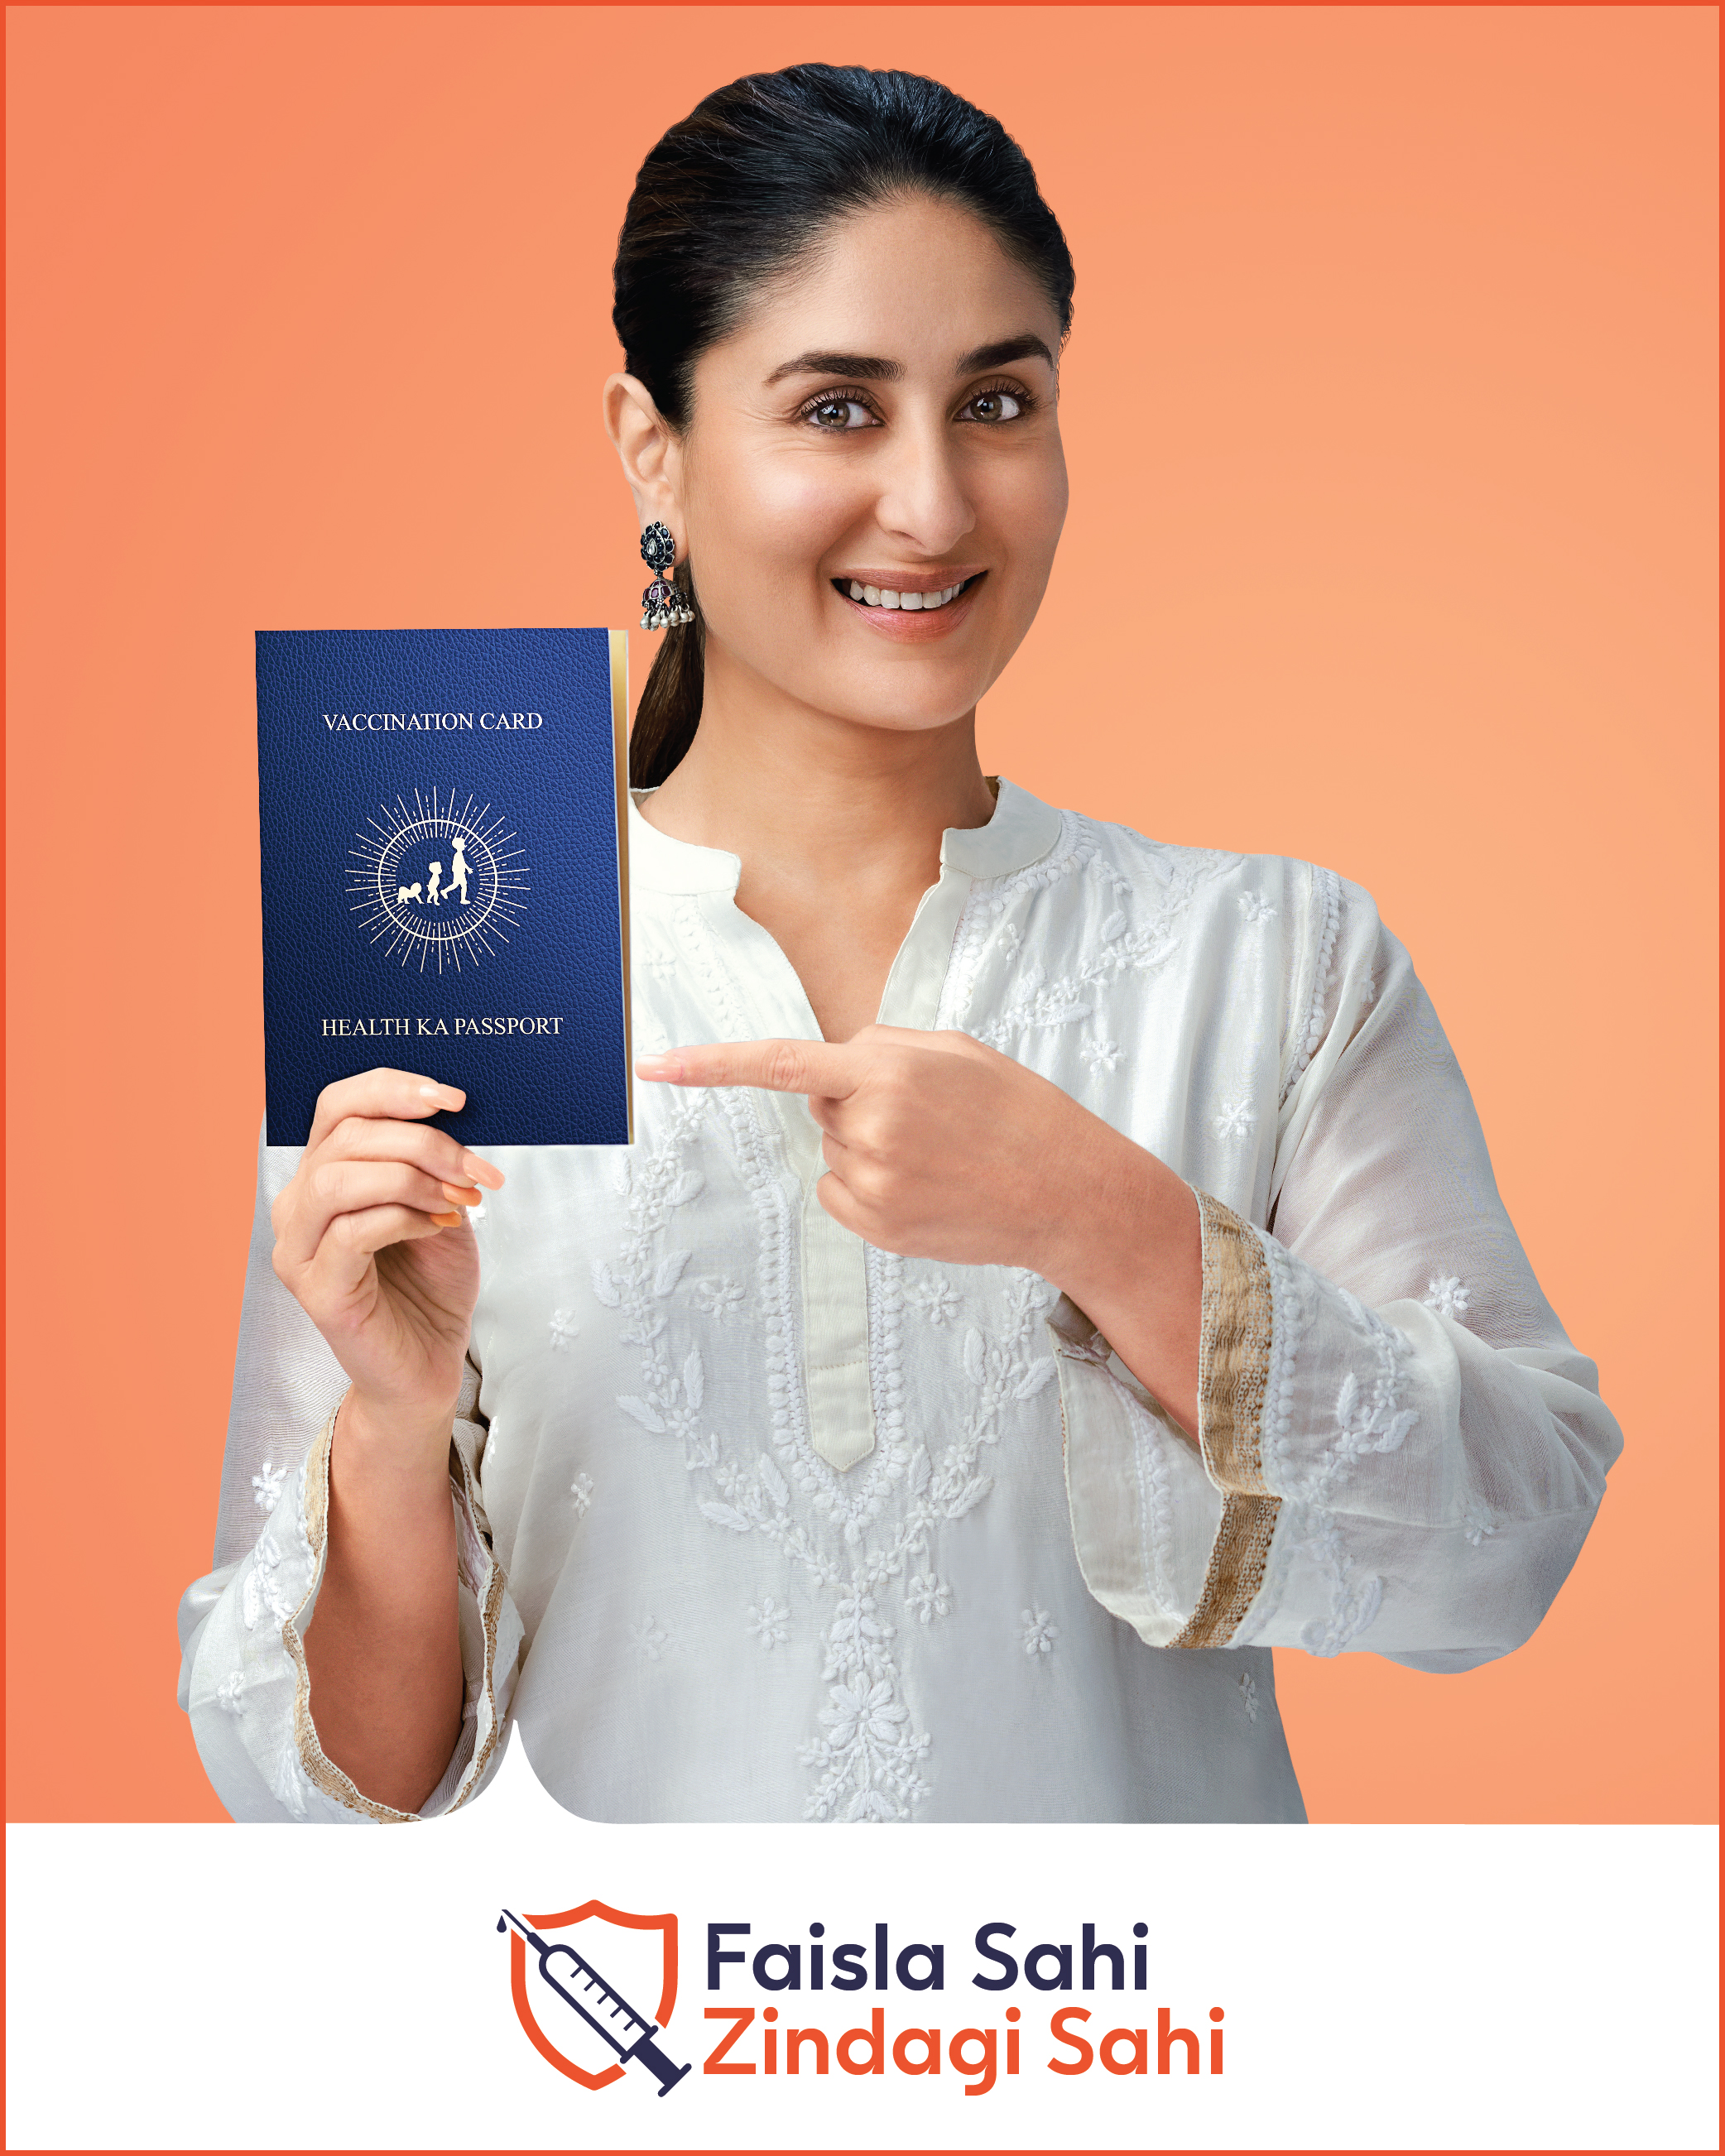 Kareena encourages parents to ensure timely vaccination for their children in GSK’s initiative “FaislaSahi, ZindagiSahi”